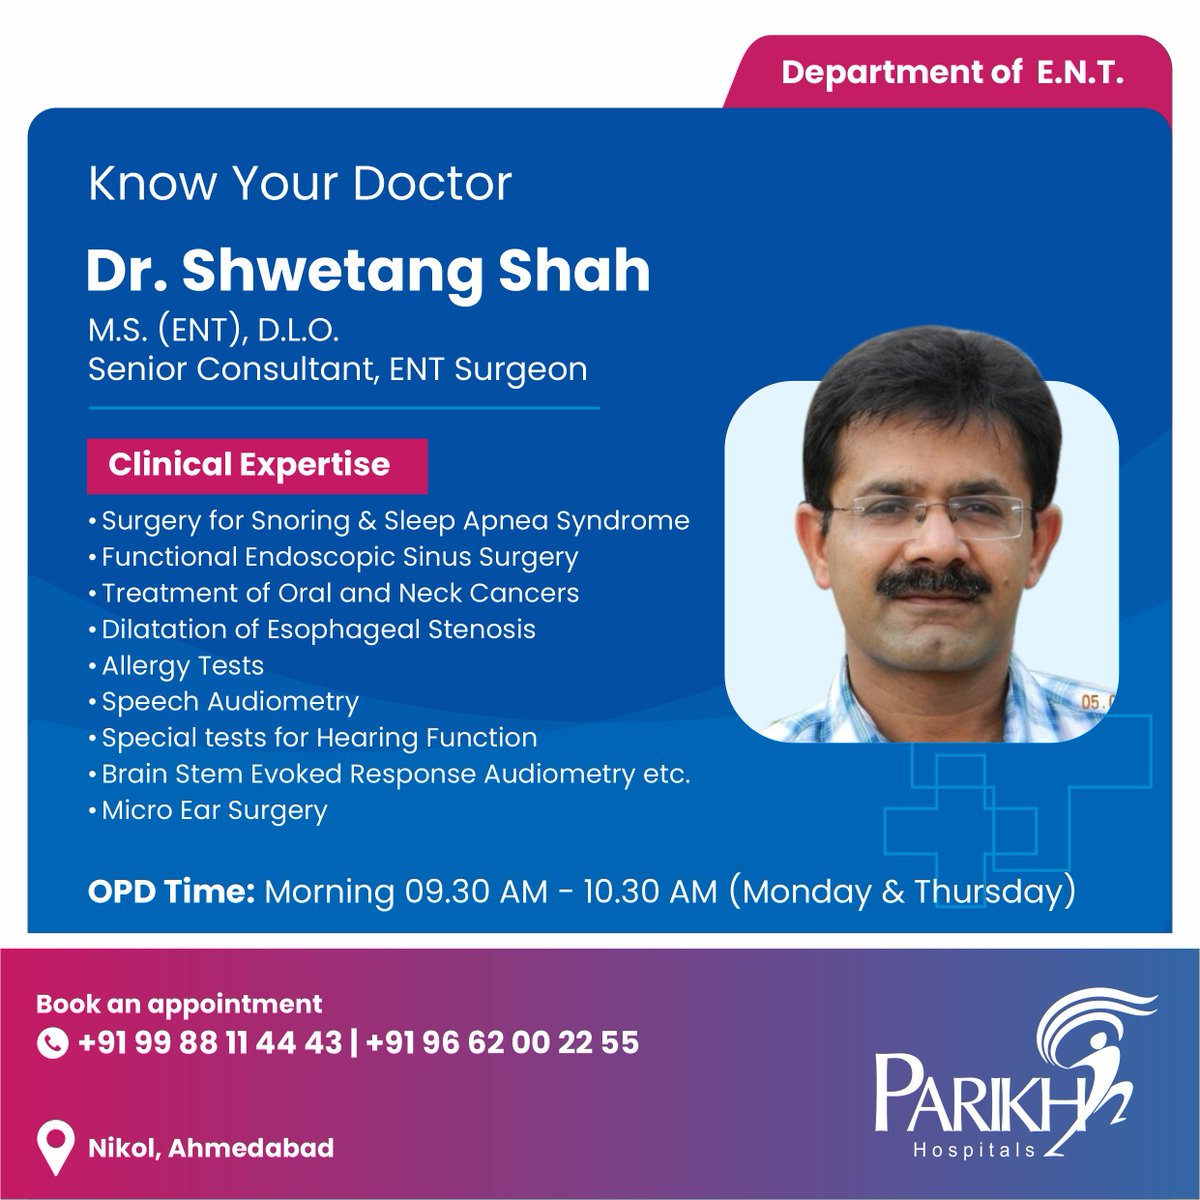 Meet Dr. Shwetang Shah - a highly trained Specialist ENT at Parikh Hospital, Nikol, Ahmedabad. #ParikhHospital #nikol #ent #HealthCare #hospital #bestdoctor #Allergy #Entdoctor #Ent #ear #nose #throat #infection #earproblem